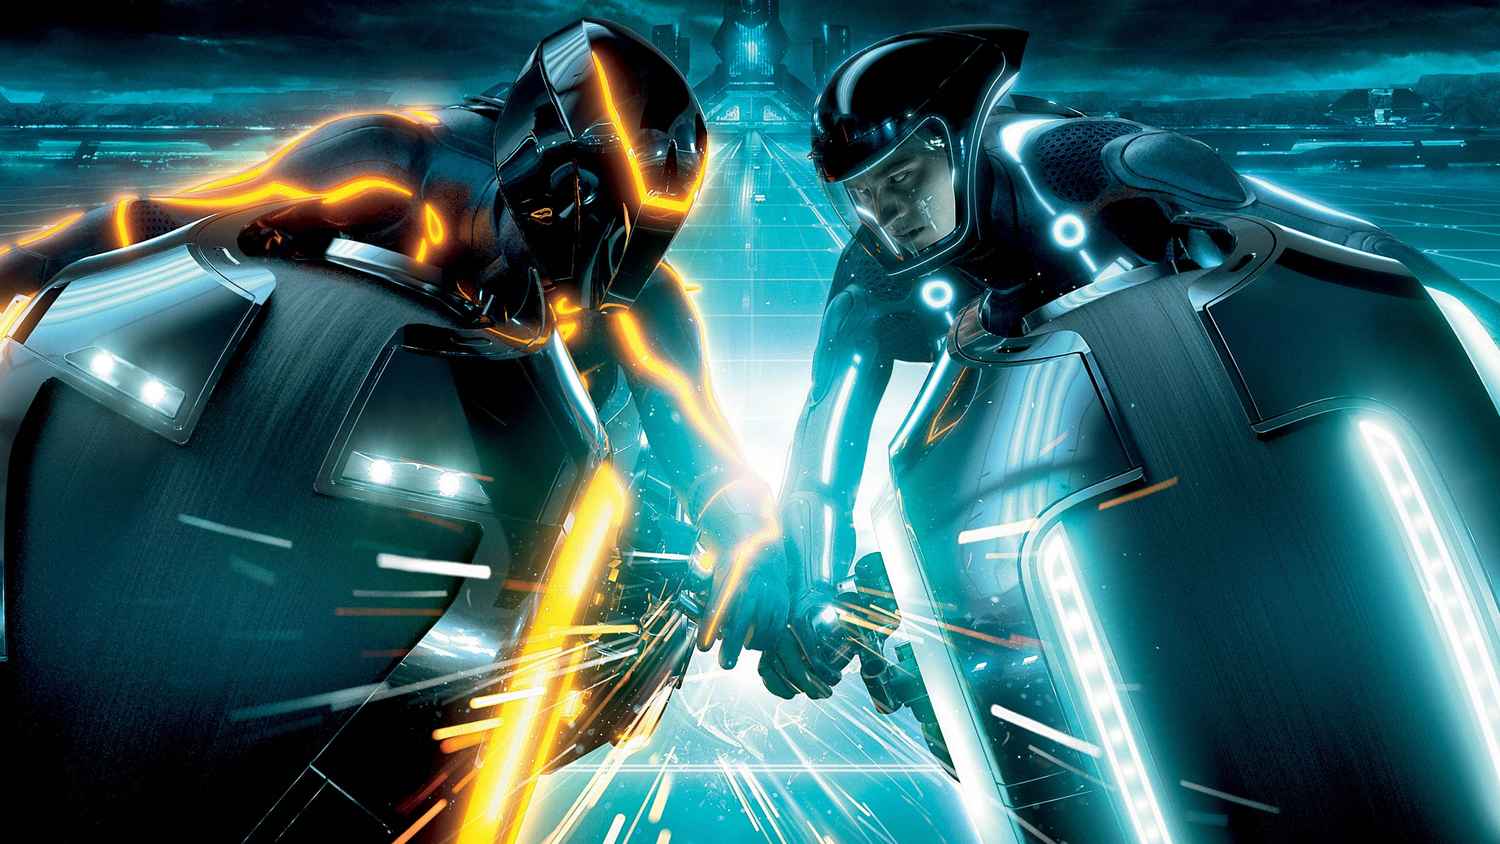 tron legacy full movie in hindi free download